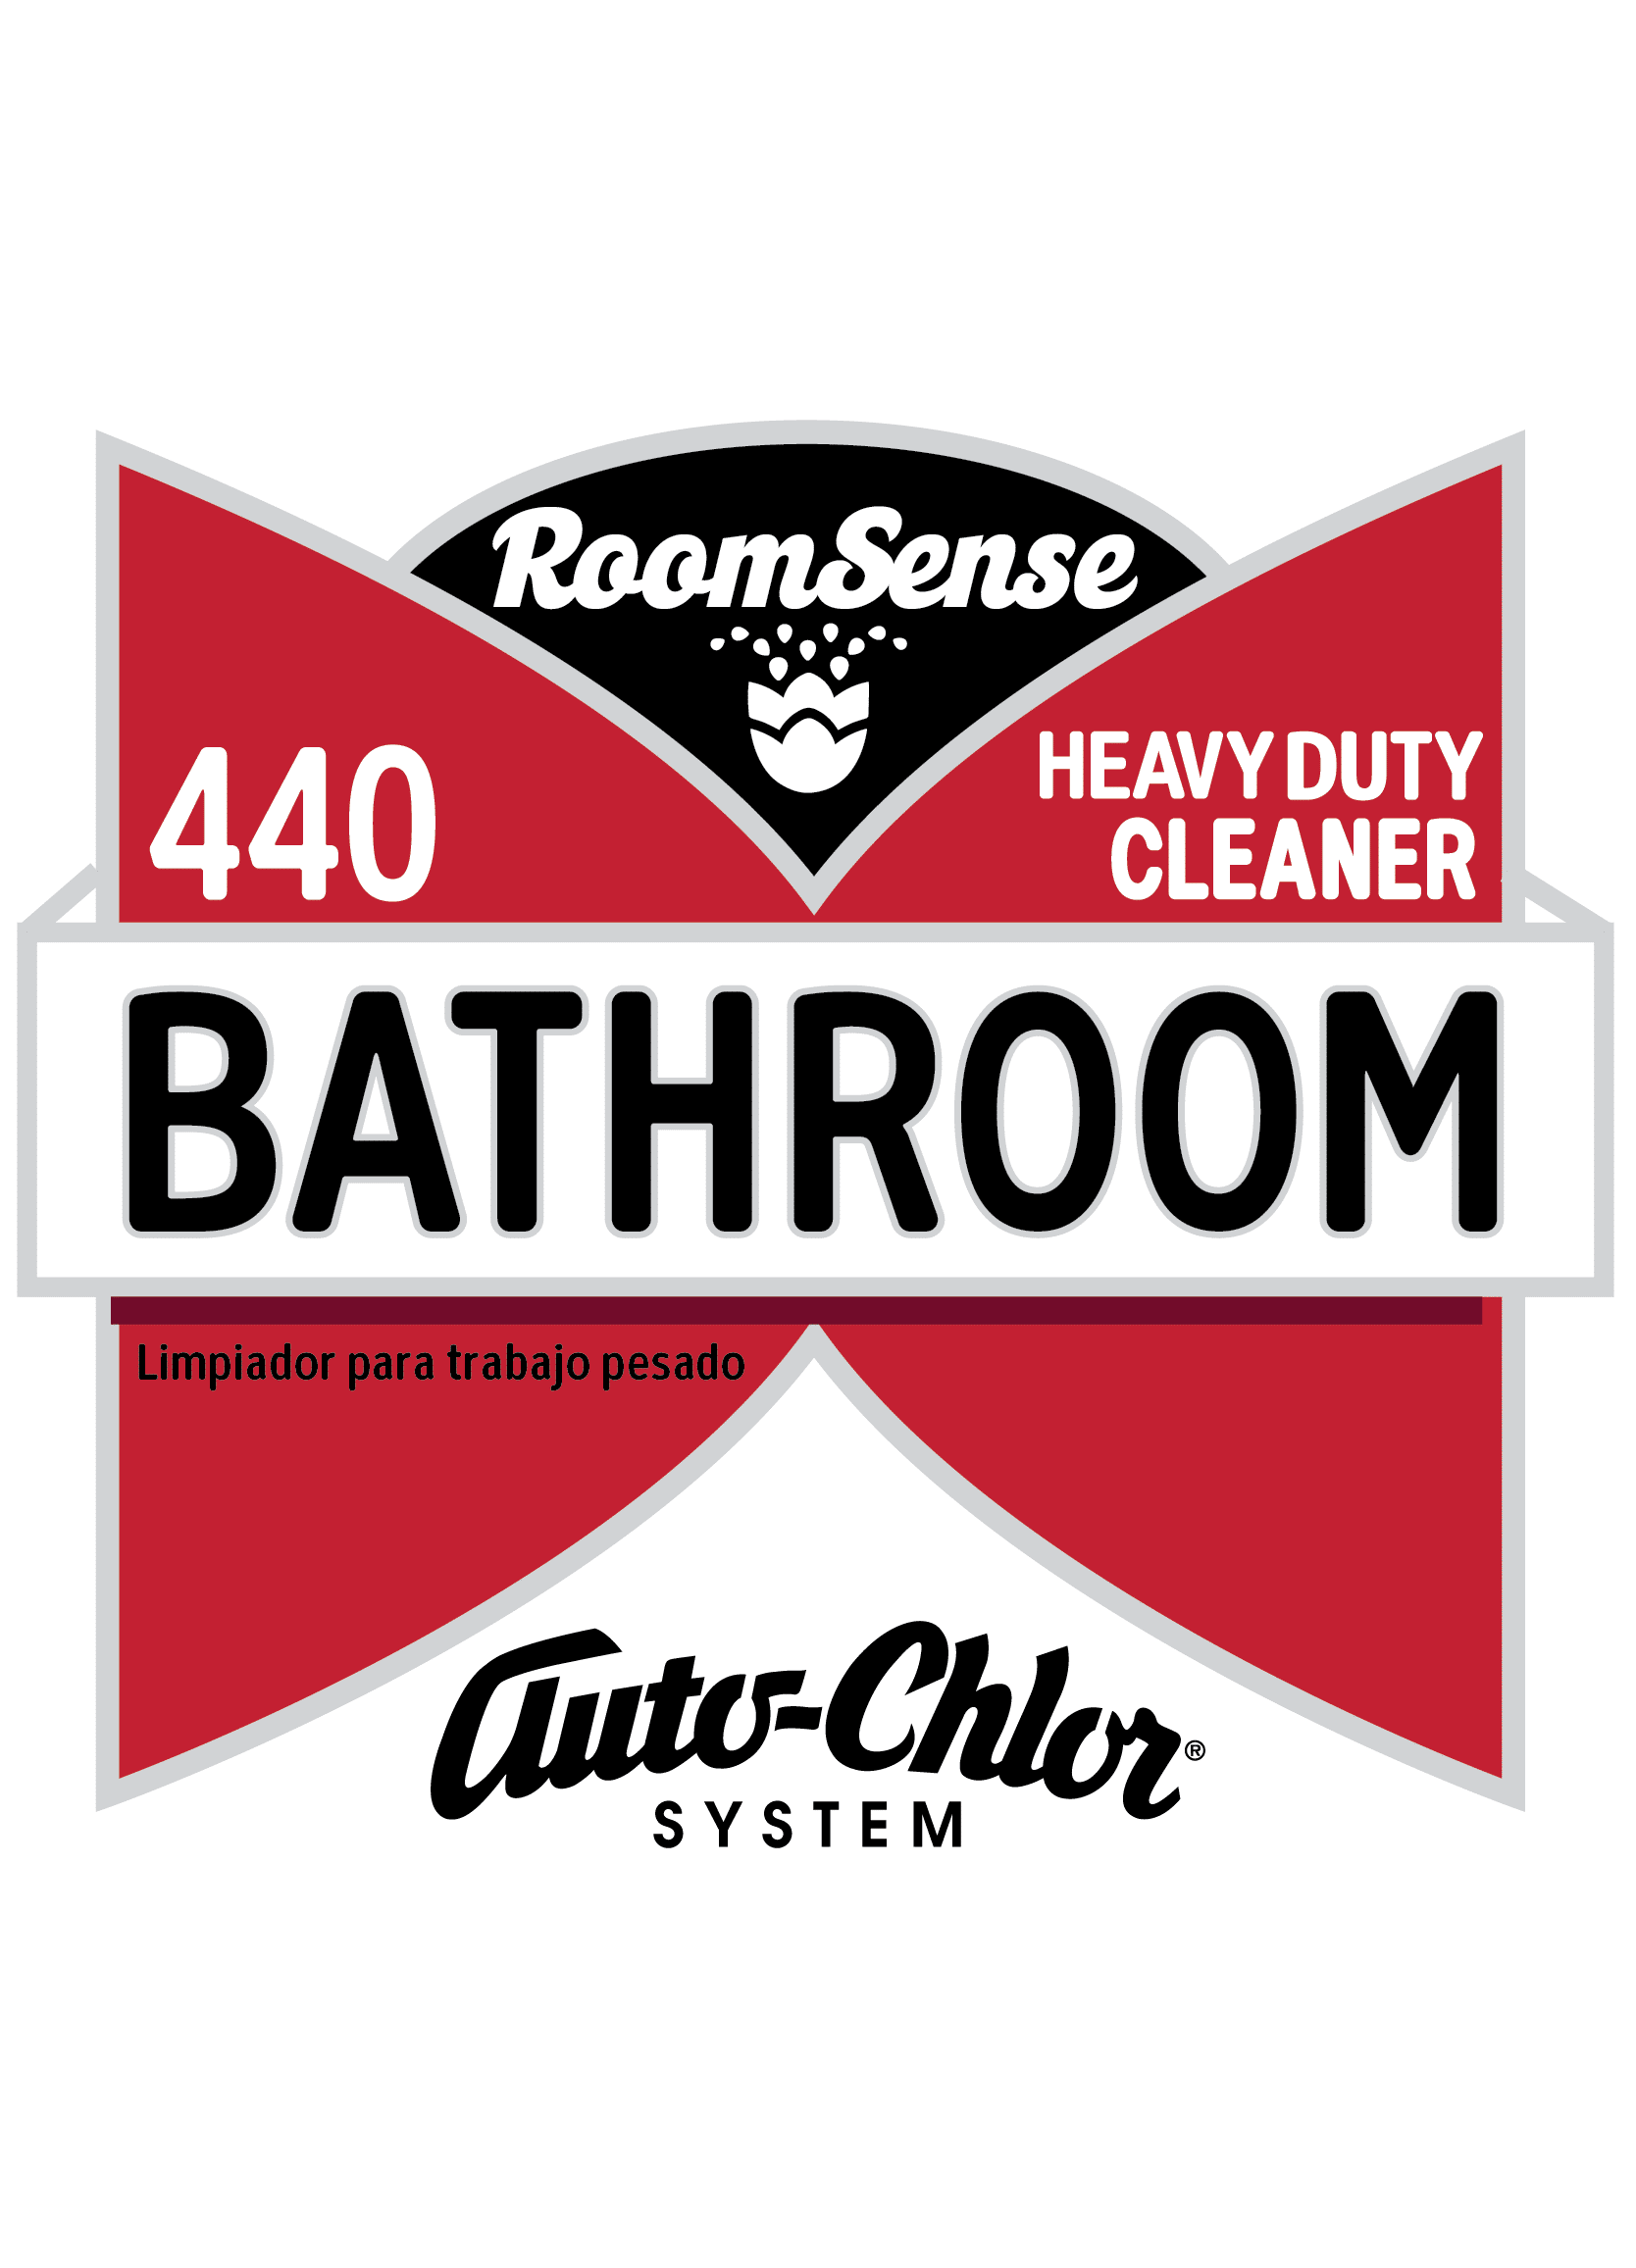 RoomSense-440 Heavy Duty Cleaner